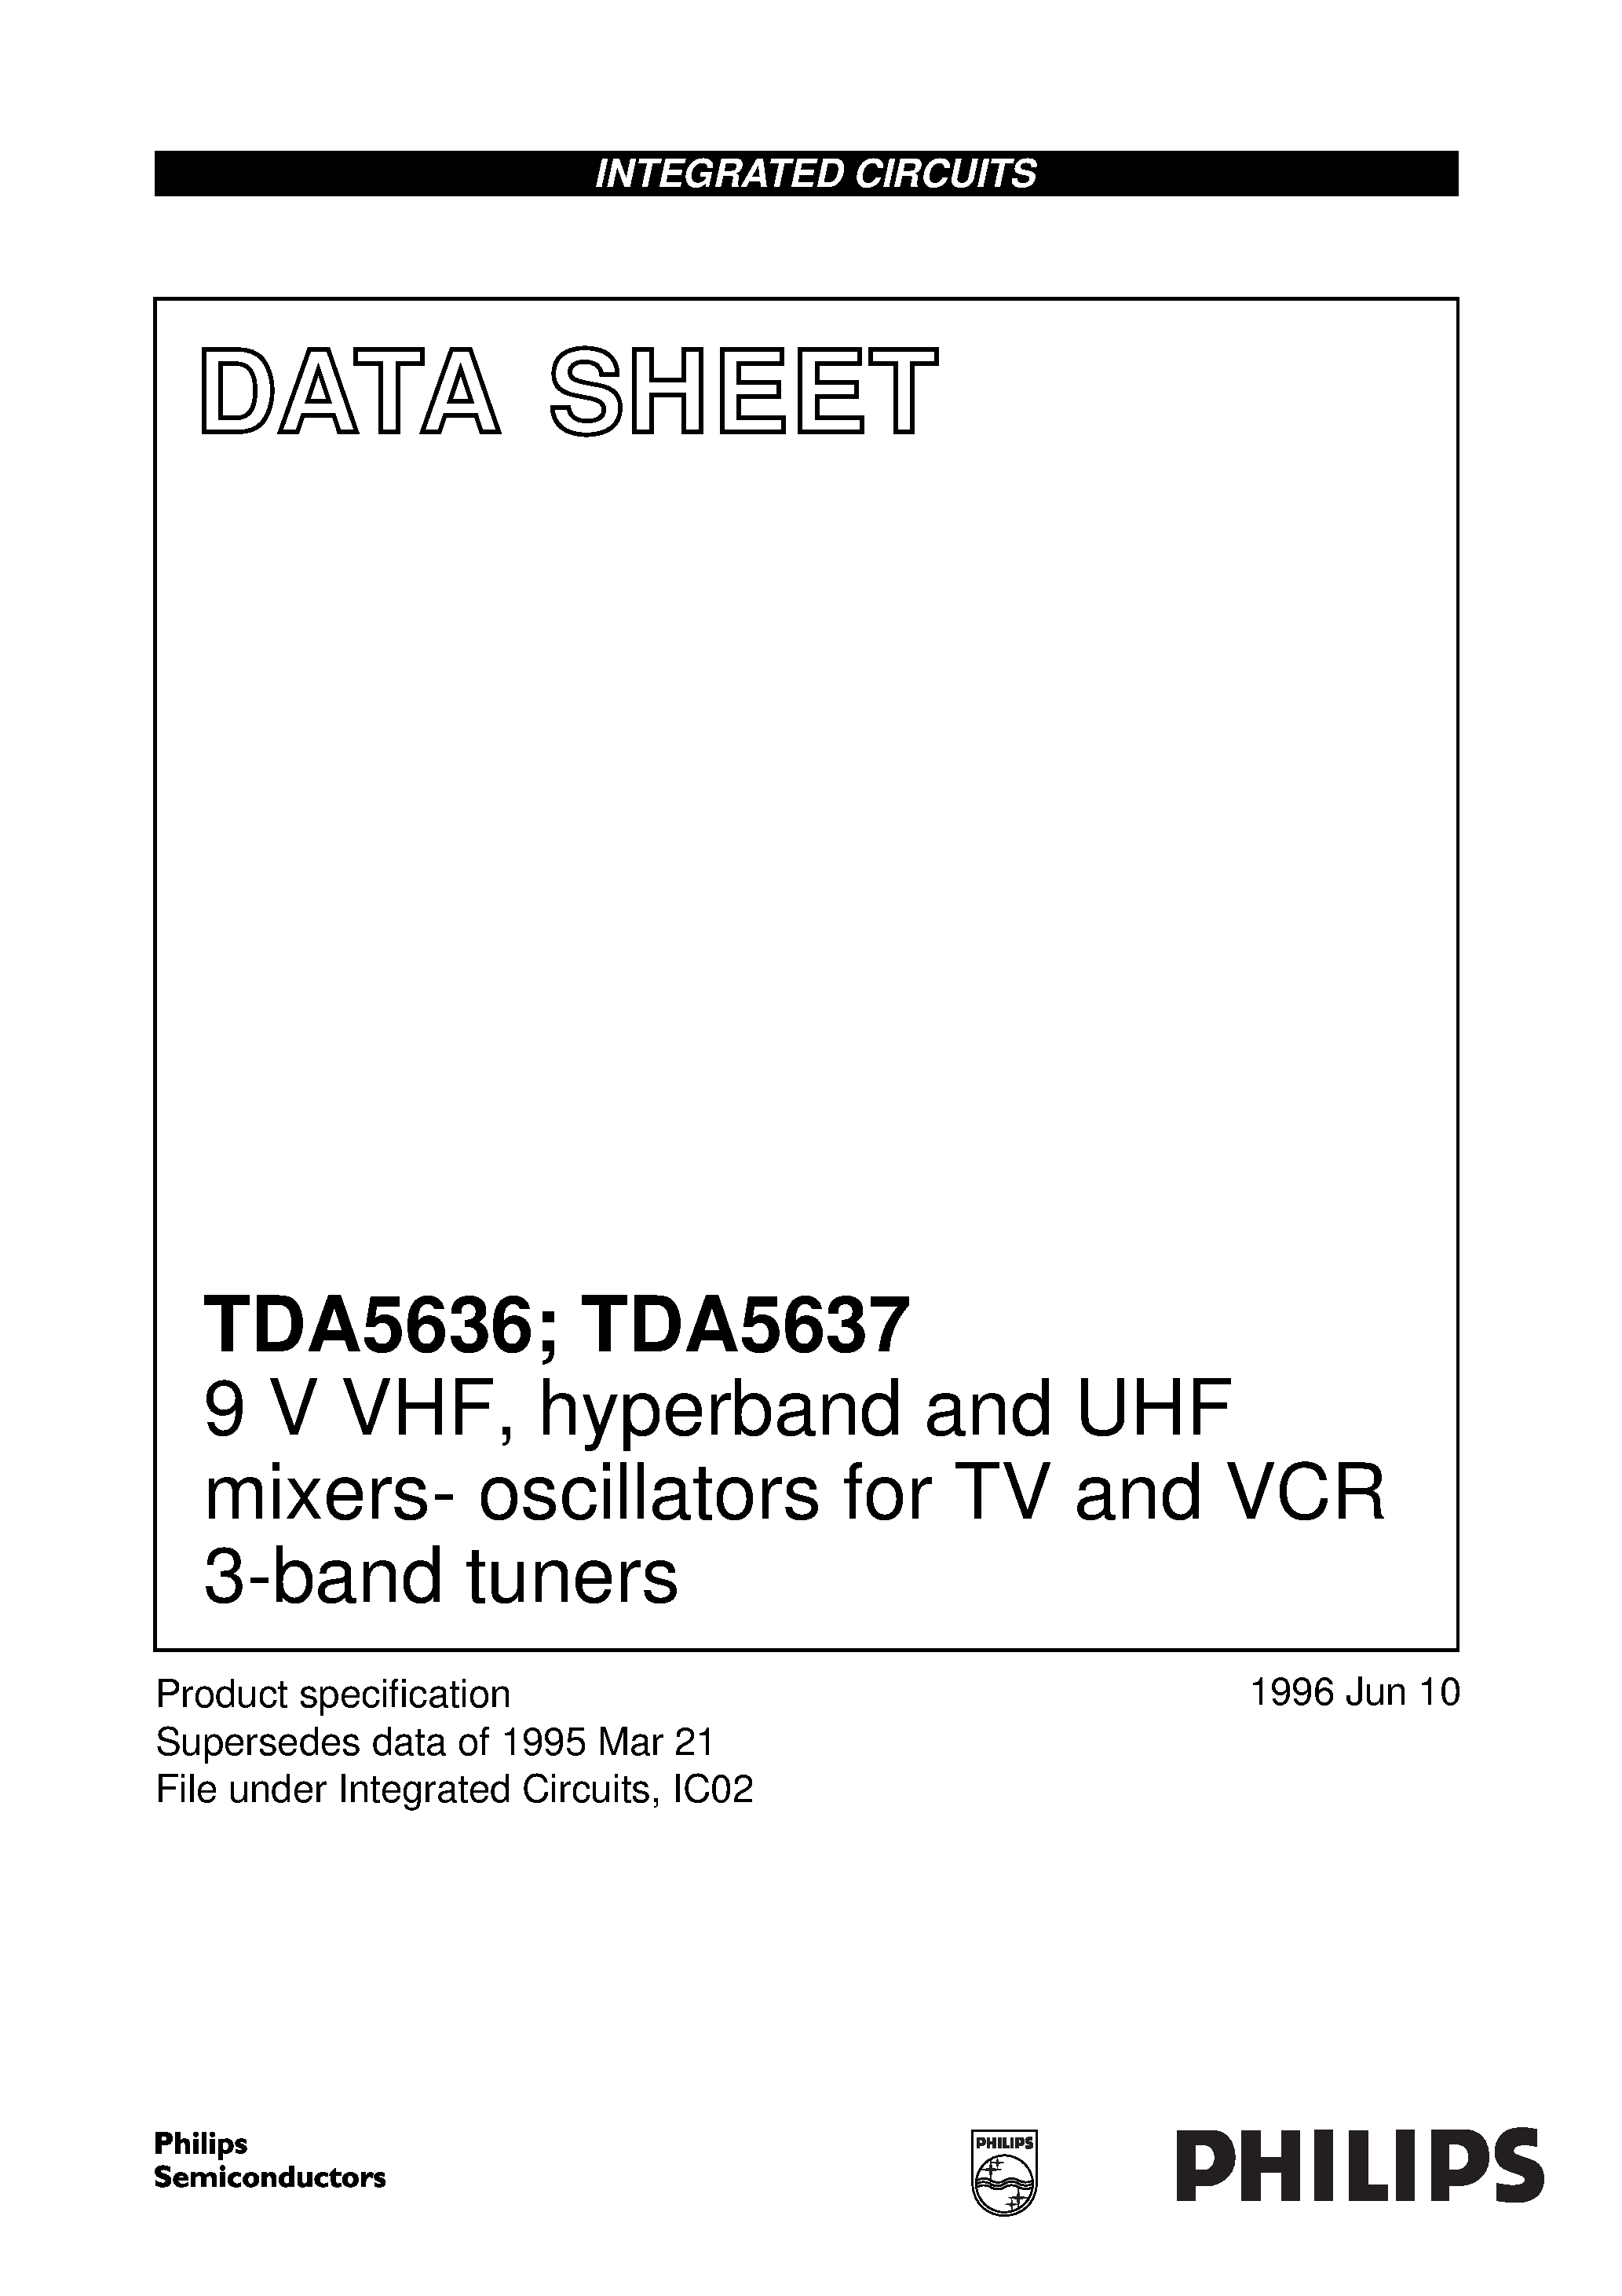 Datasheet TDA5637 - 9 V VHF/ hyperband and UHF mixers- oscillators for TV and VCR 3-band tuners page 1